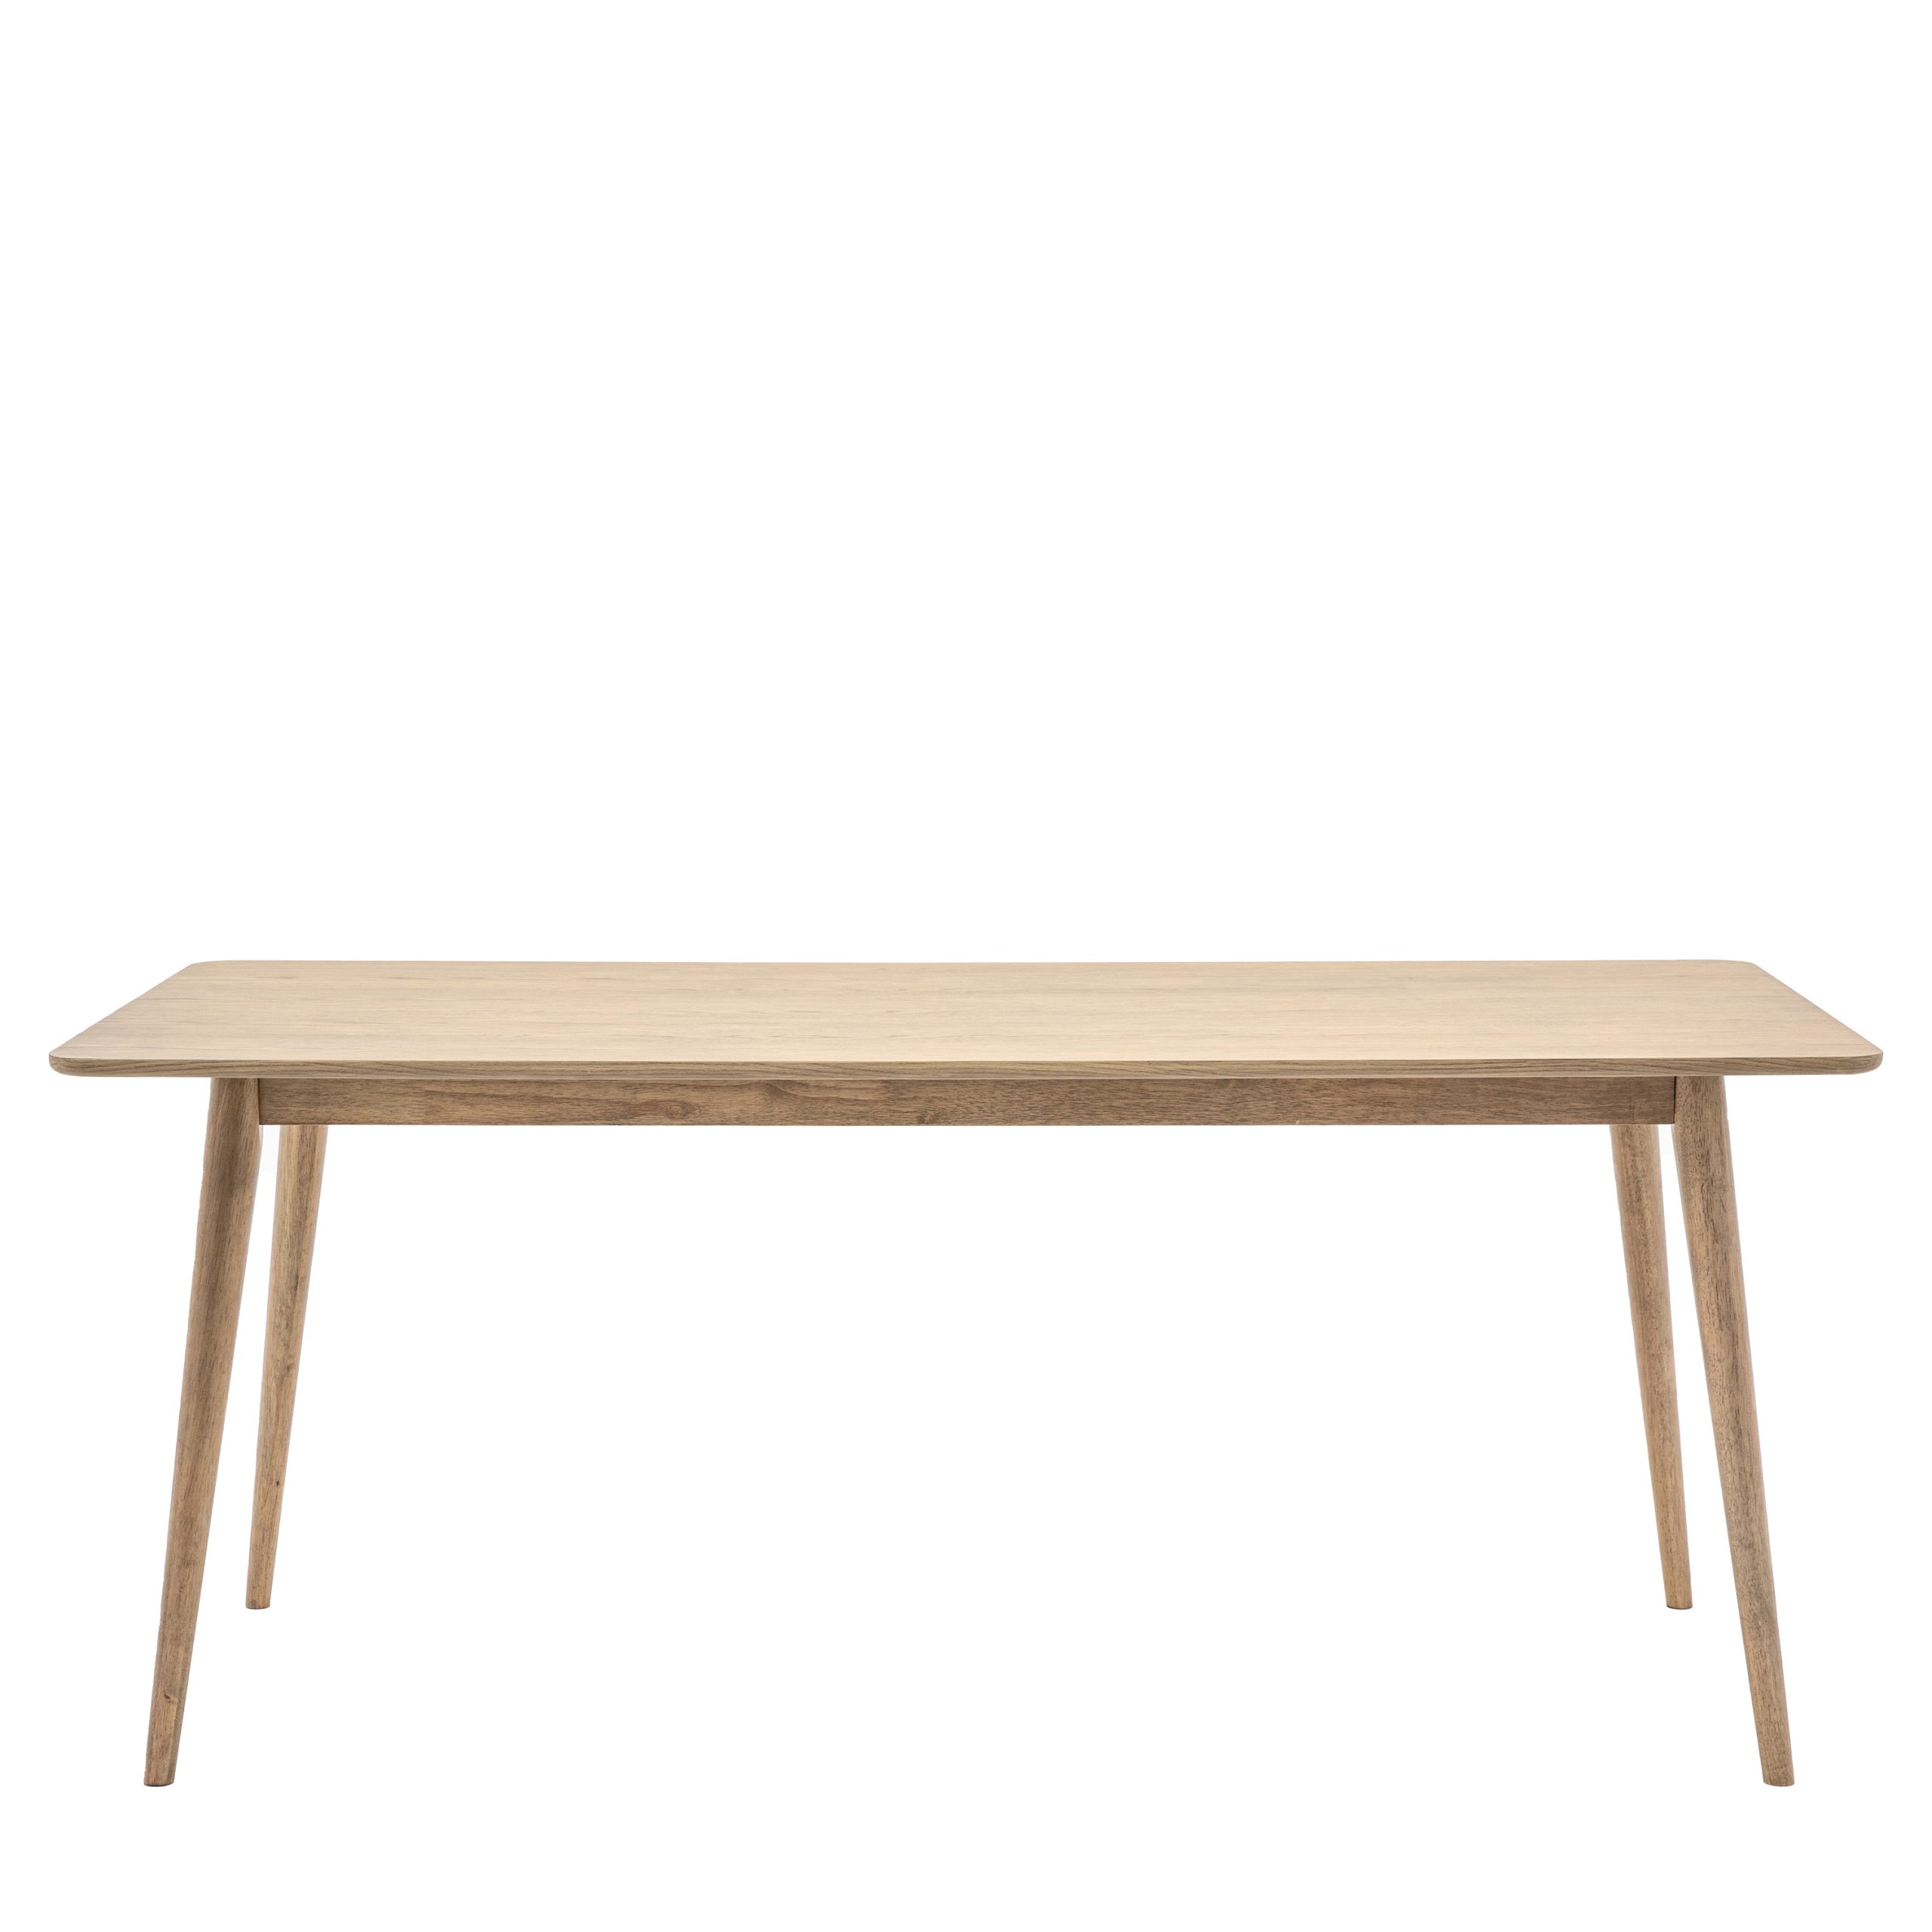 Gallery Direct Panelled Dining Table